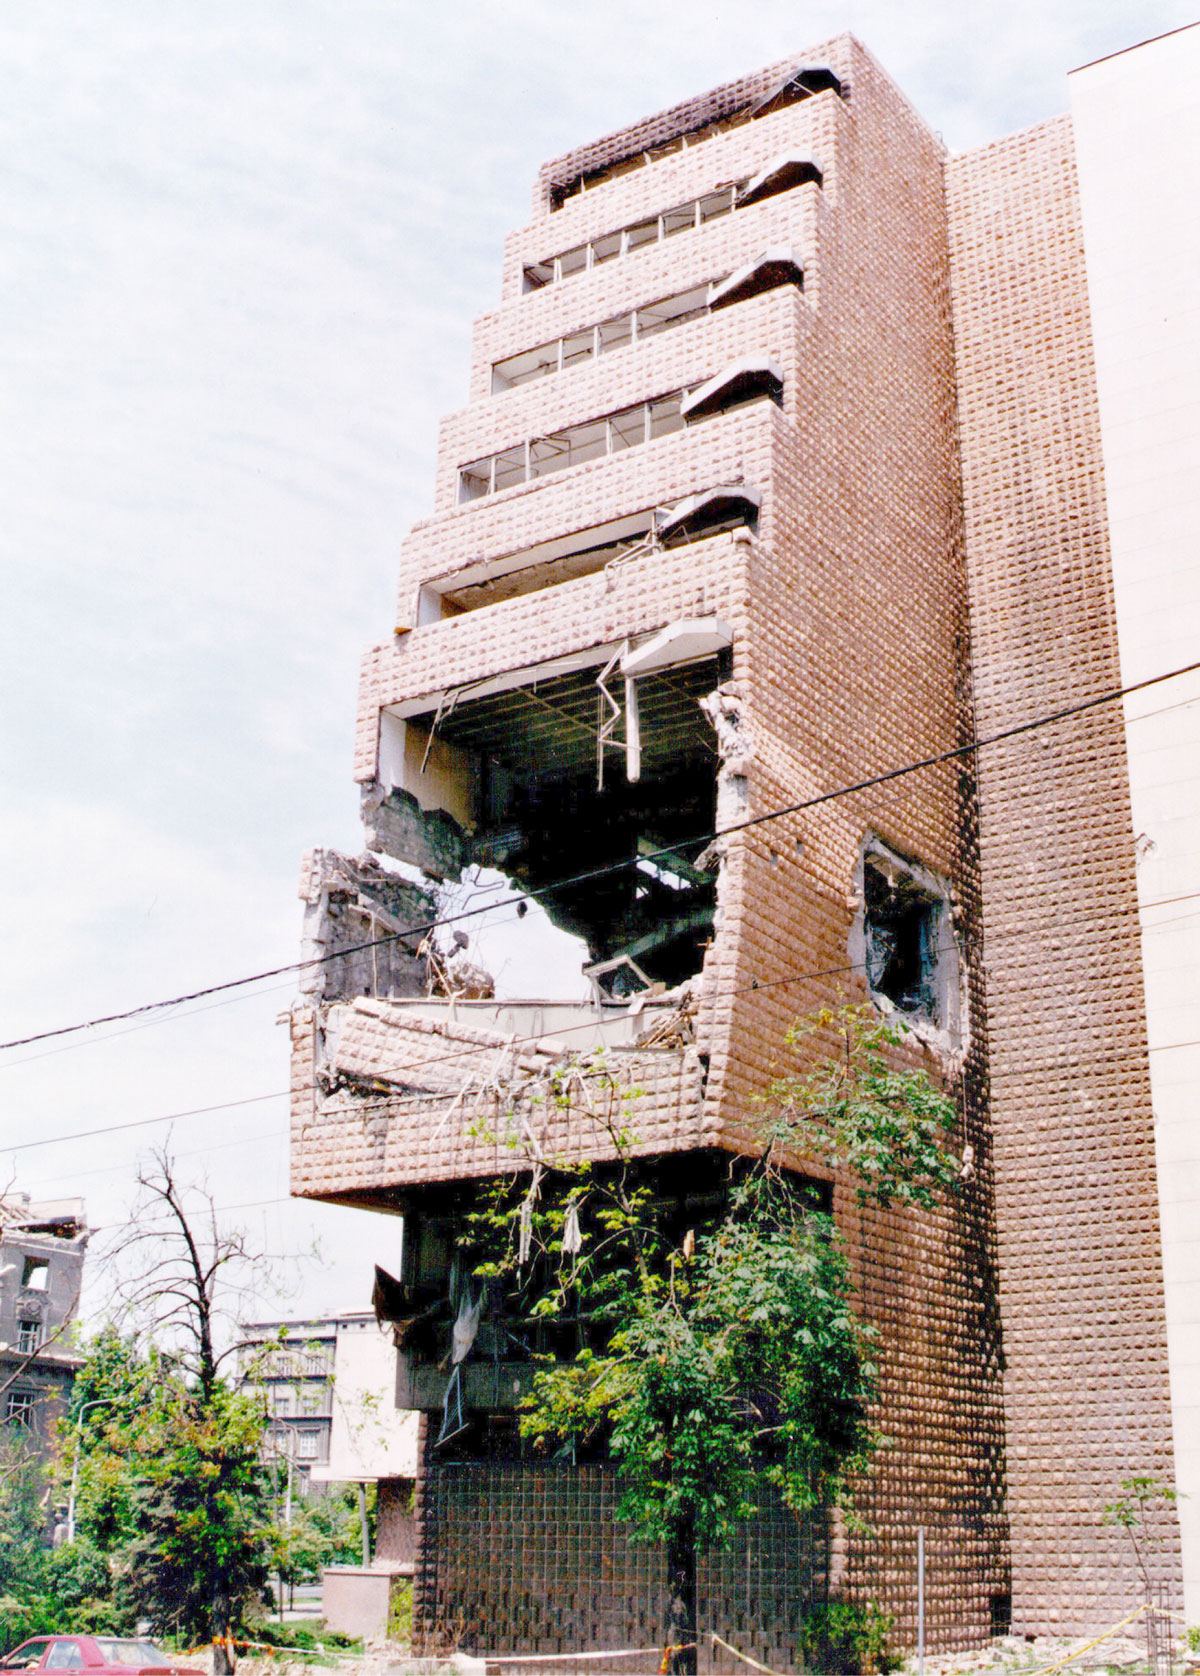 A photograph of a wing of the Serbian Army Headquarters in Belgrade after being damaged by NATO bombing.